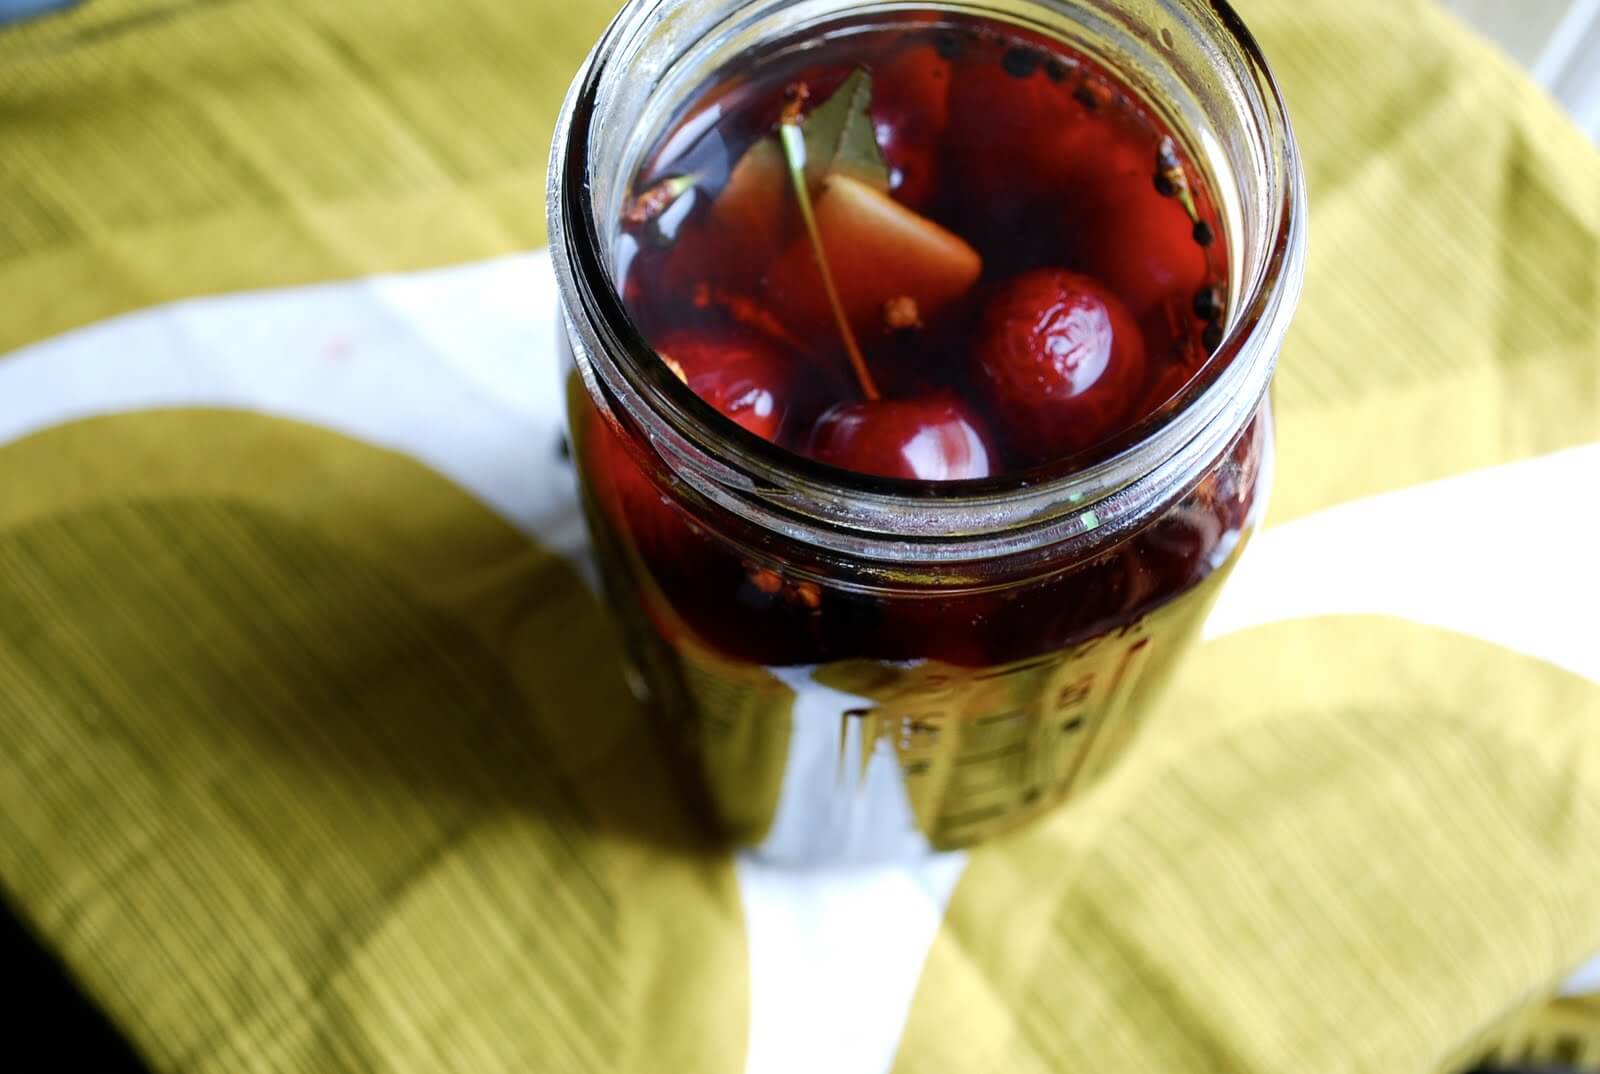 How to make quick-pickled cherries and punchy quick-pickled cucumbers.